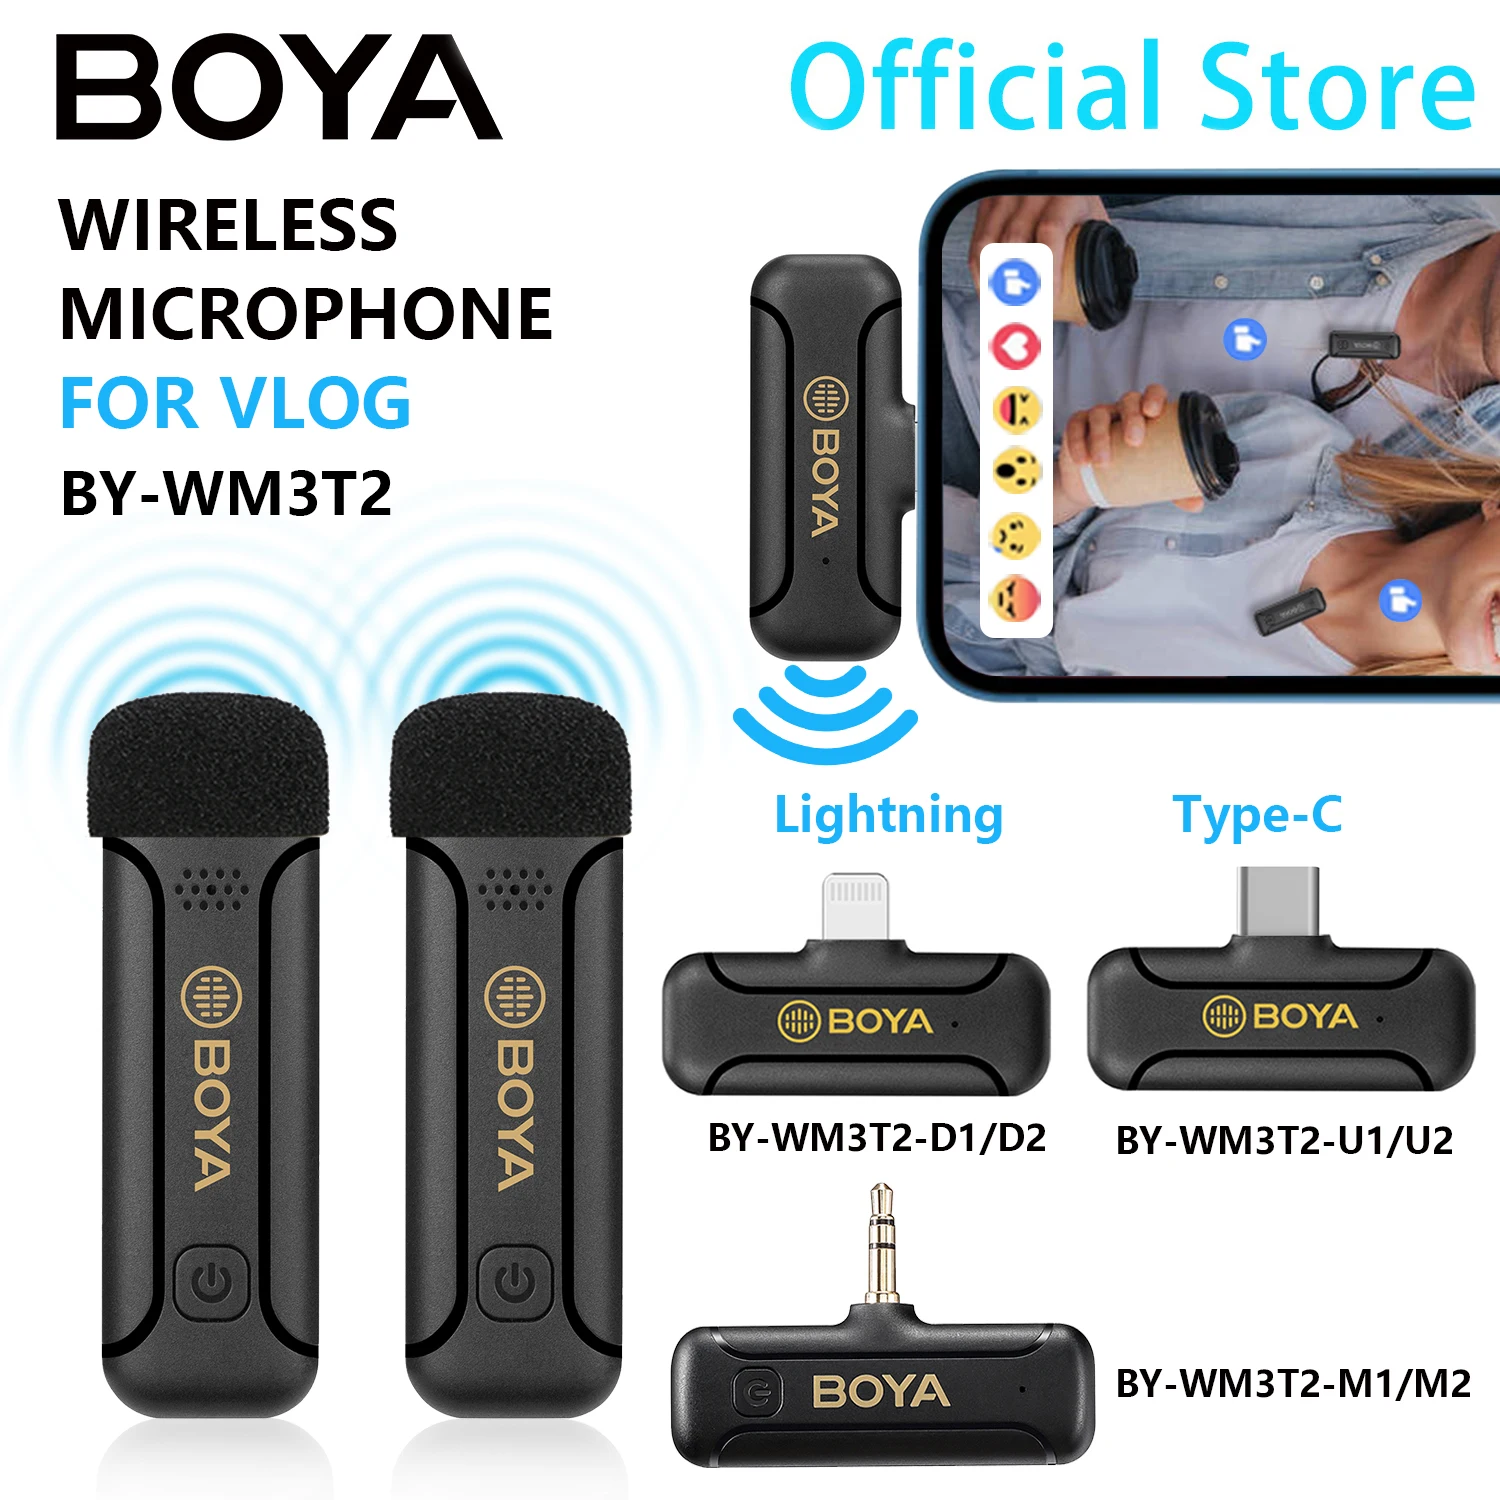 BOYA BY-WM3T2 Mini Vlog Condenser Wireless Lavalier Lapel Microphone for PC iPhone Android Mobile Streaming Youtube Recording enlarge